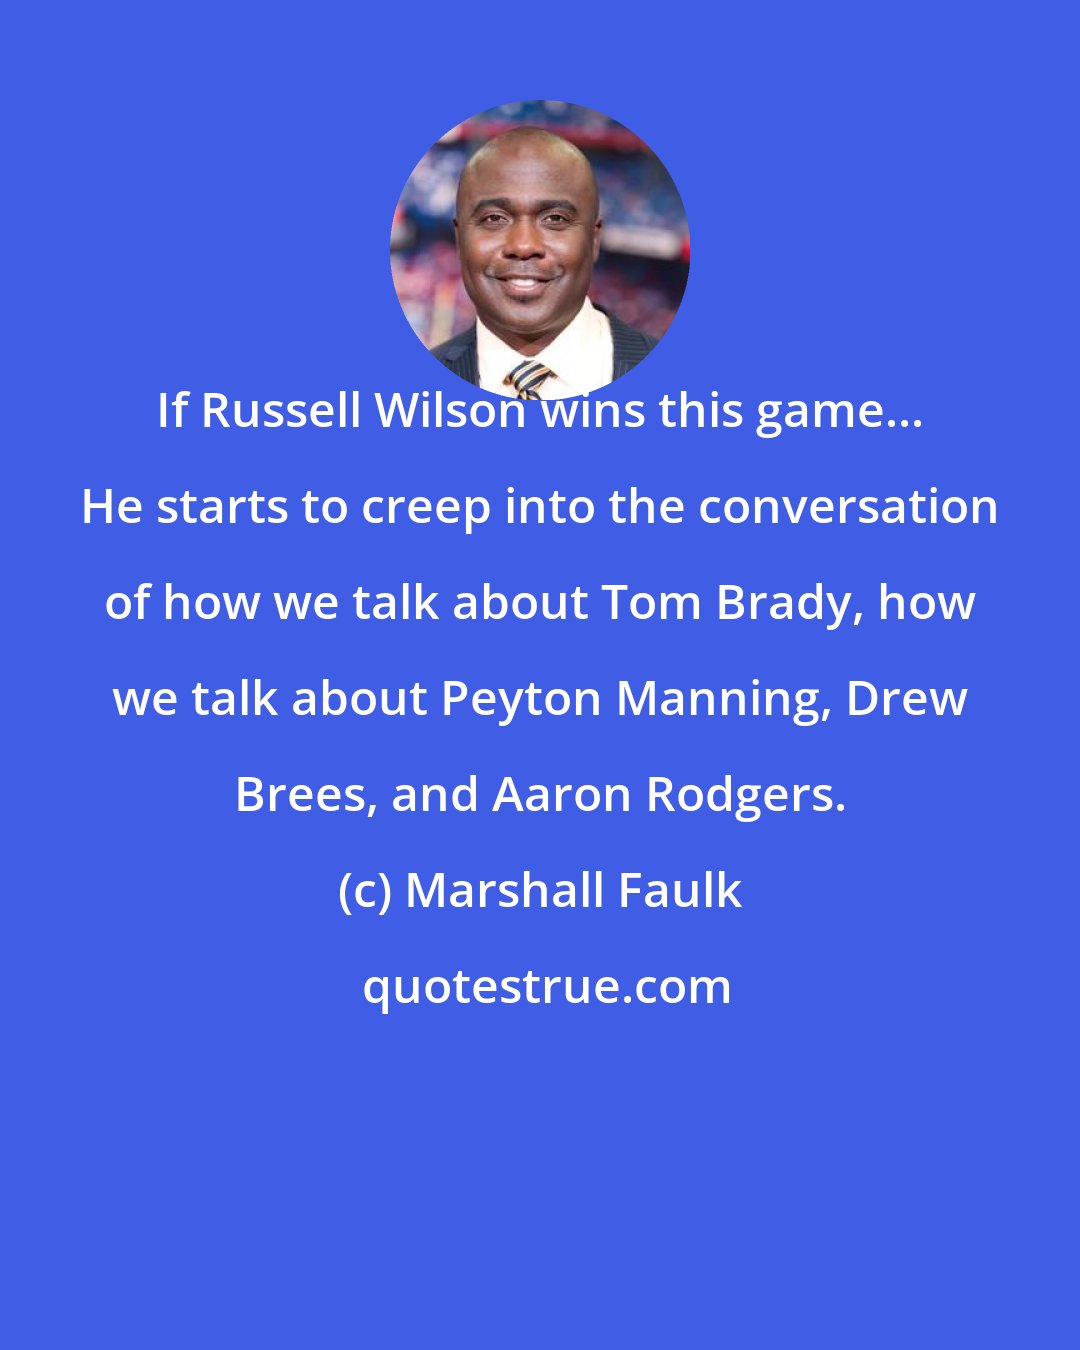 Marshall Faulk: If Russell Wilson wins this game... He starts to creep into the conversation of how we talk about Tom Brady, how we talk about Peyton Manning, Drew Brees, and Aaron Rodgers.